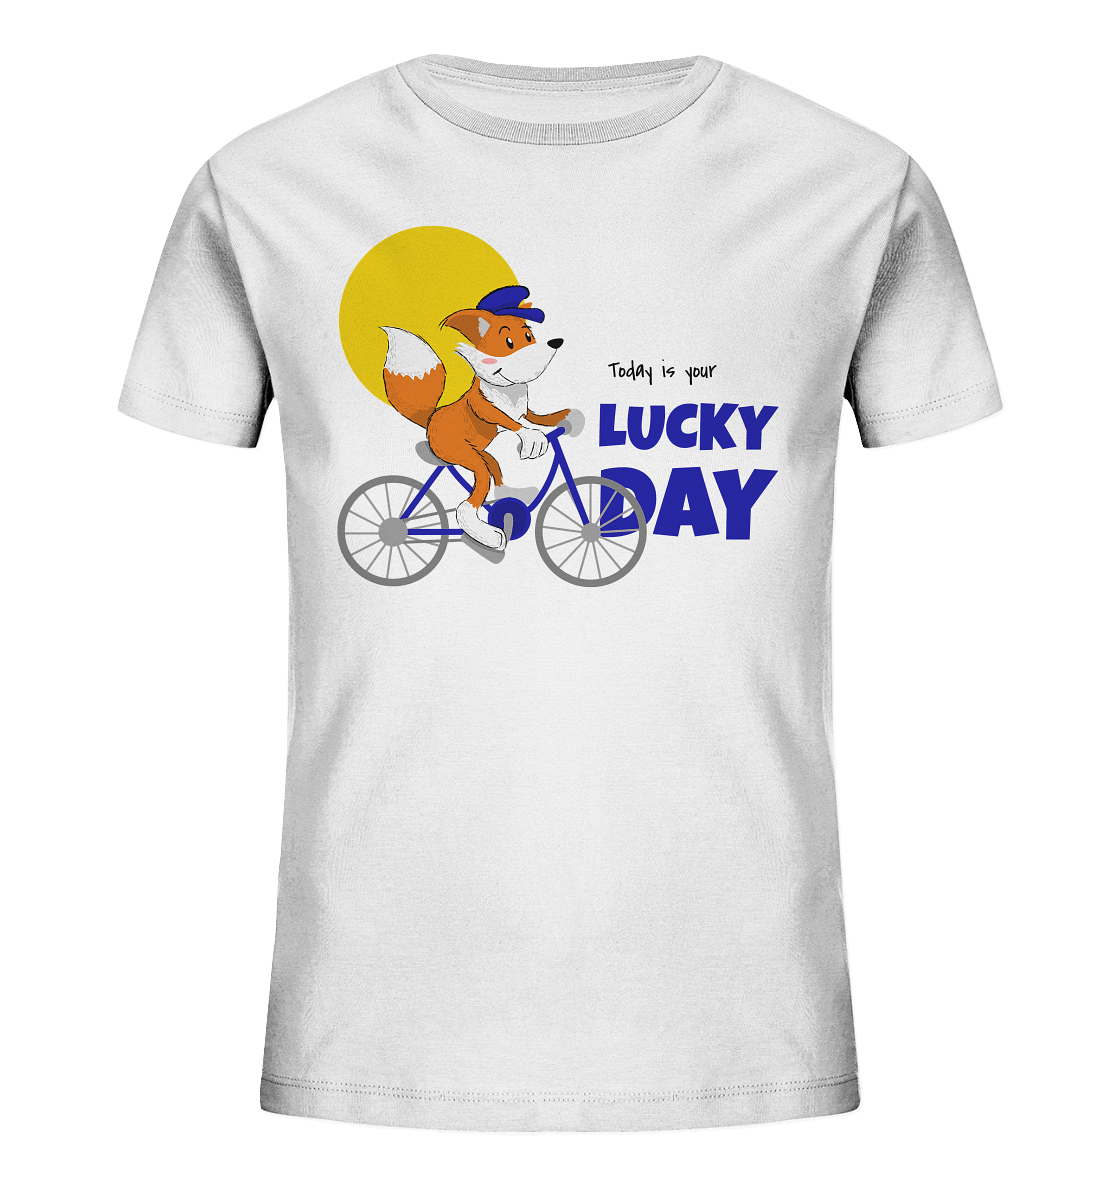 Kinder T-Shirt "Today is your lucky Day"